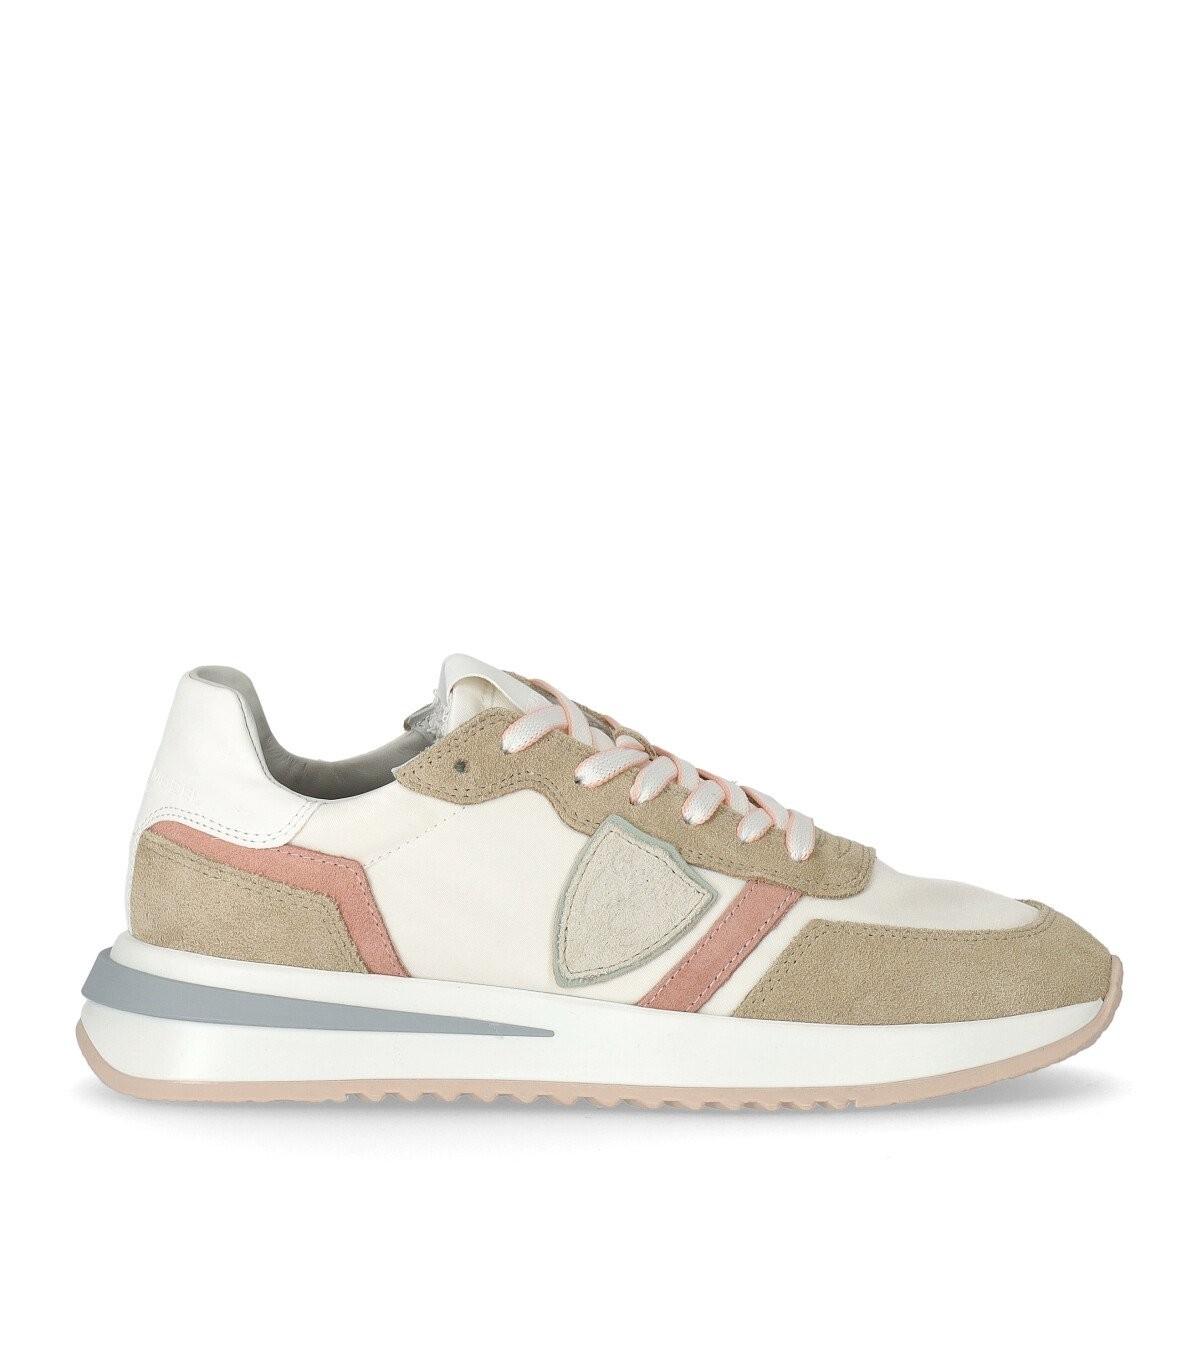 Philippe Model Tropez 2.1 White Sand Sneaker in Natural | Lyst